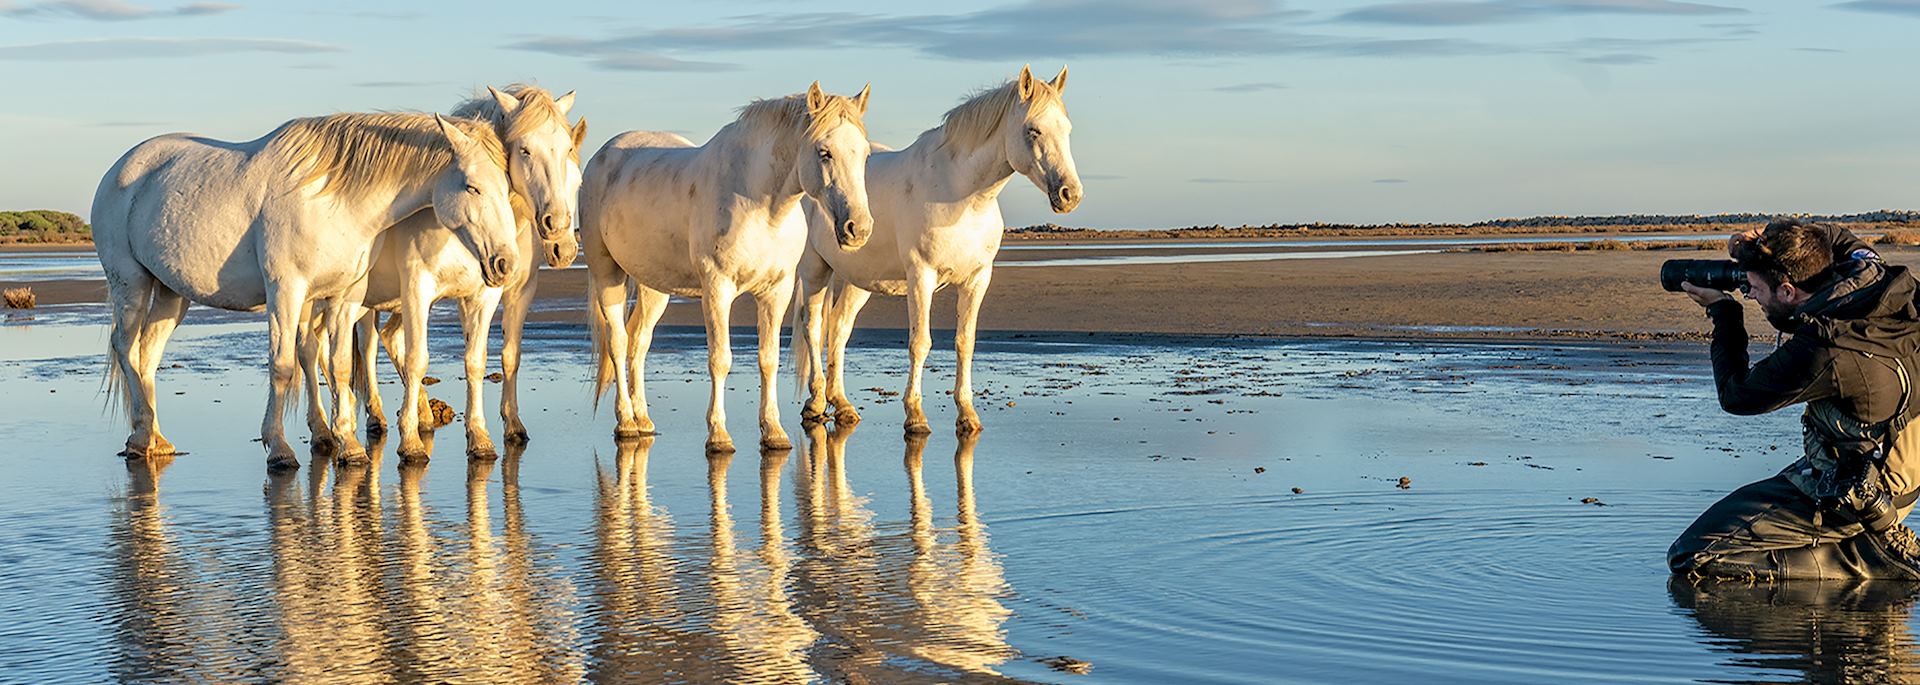 Horses in the Camargue, France - © Harry Skeggs